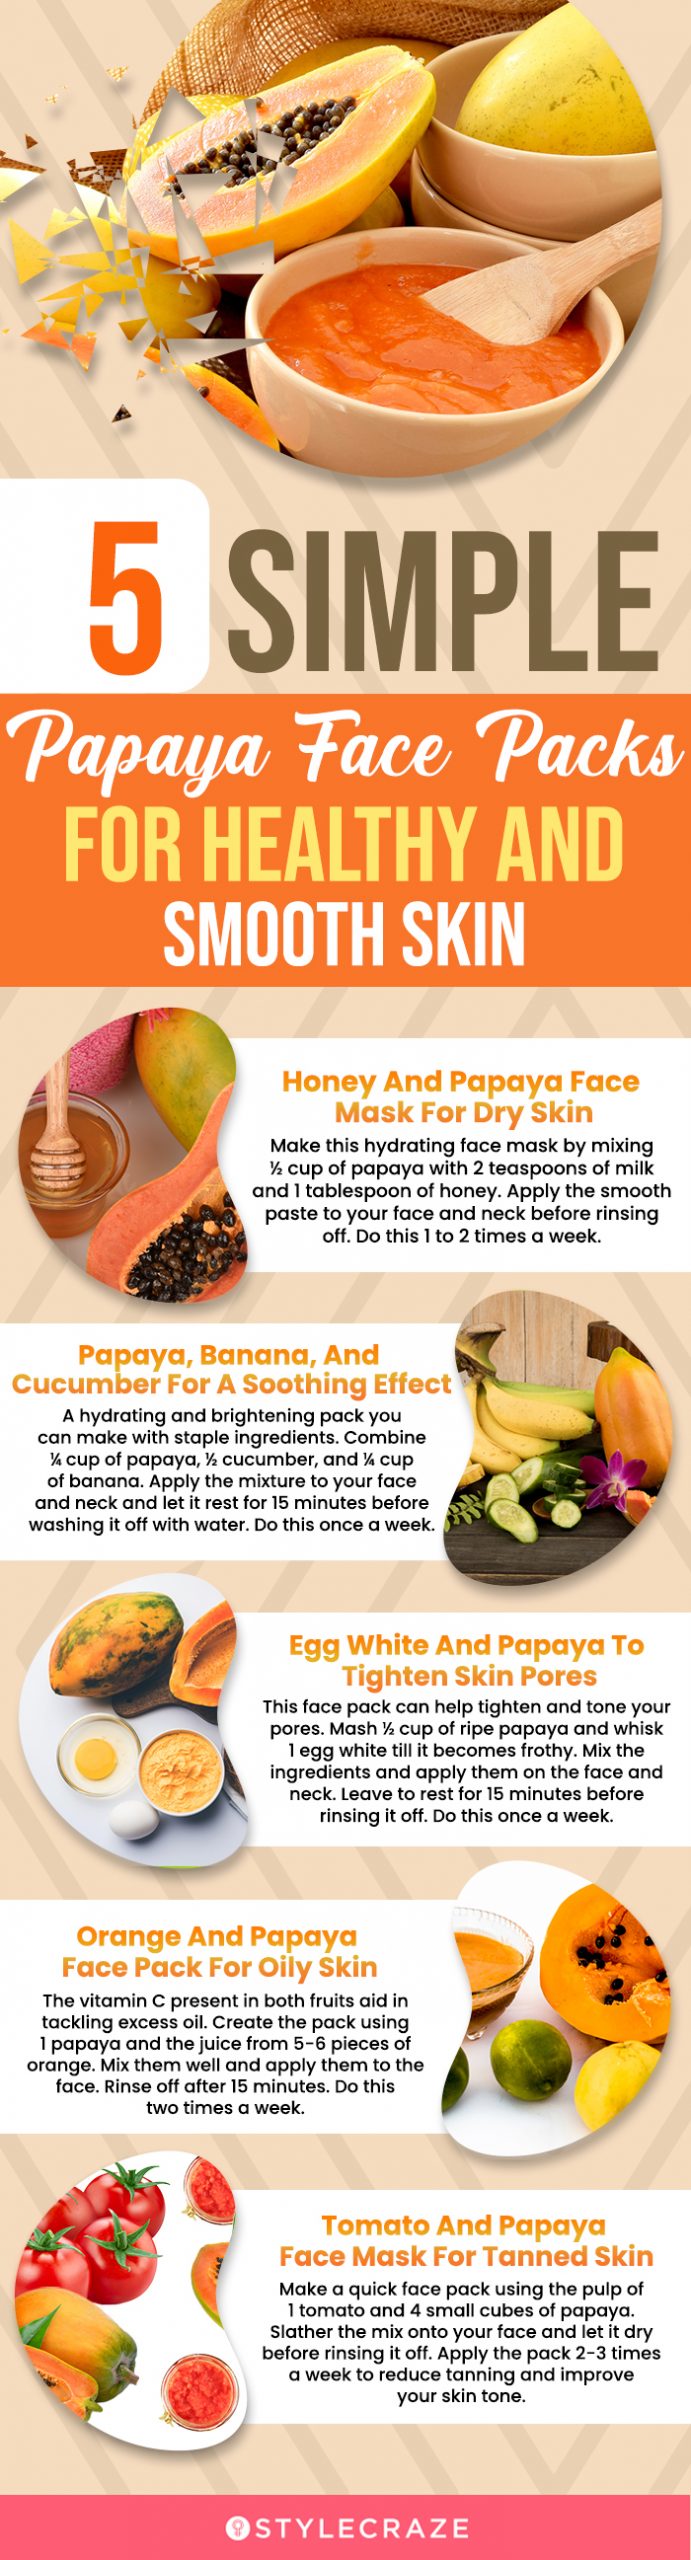 5 simple papaya face packs for healthy and smooth skin [infographic]